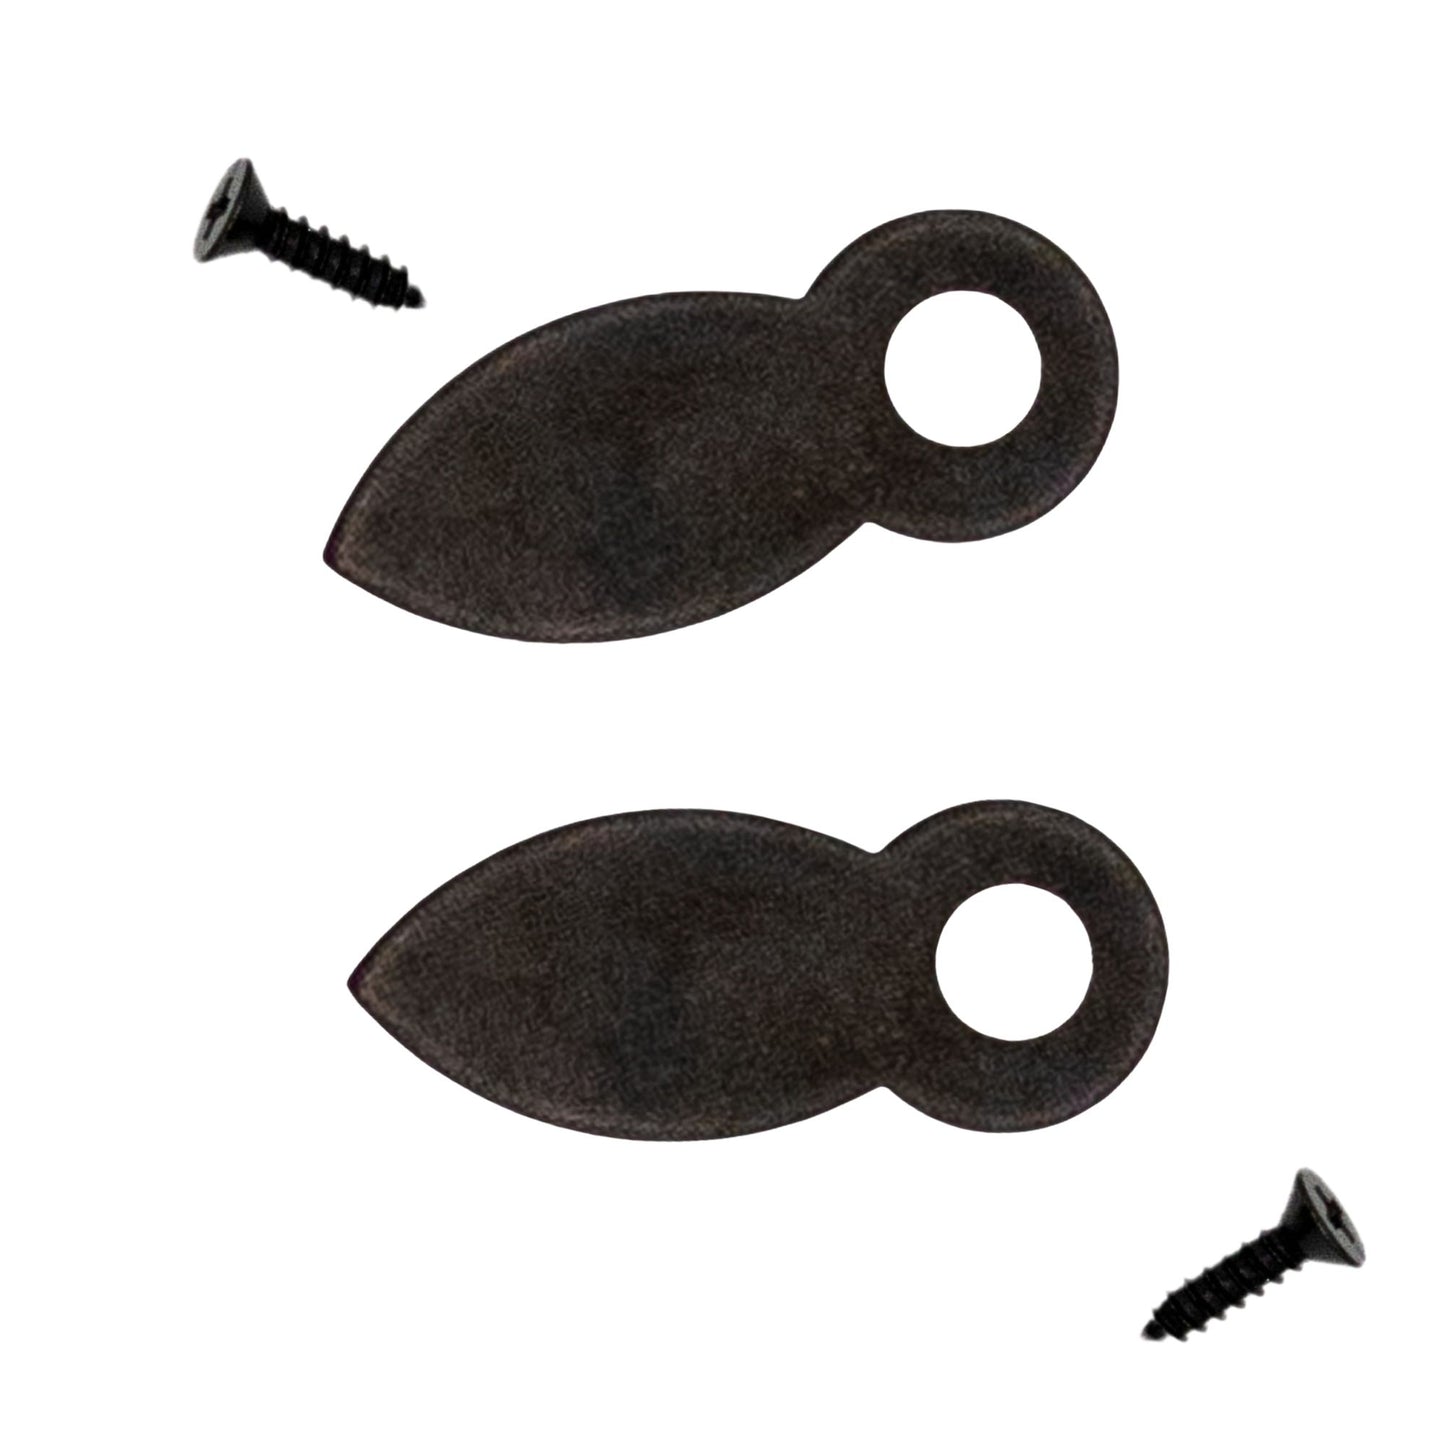 3/4" Black Turn Button Fasteners with Screws